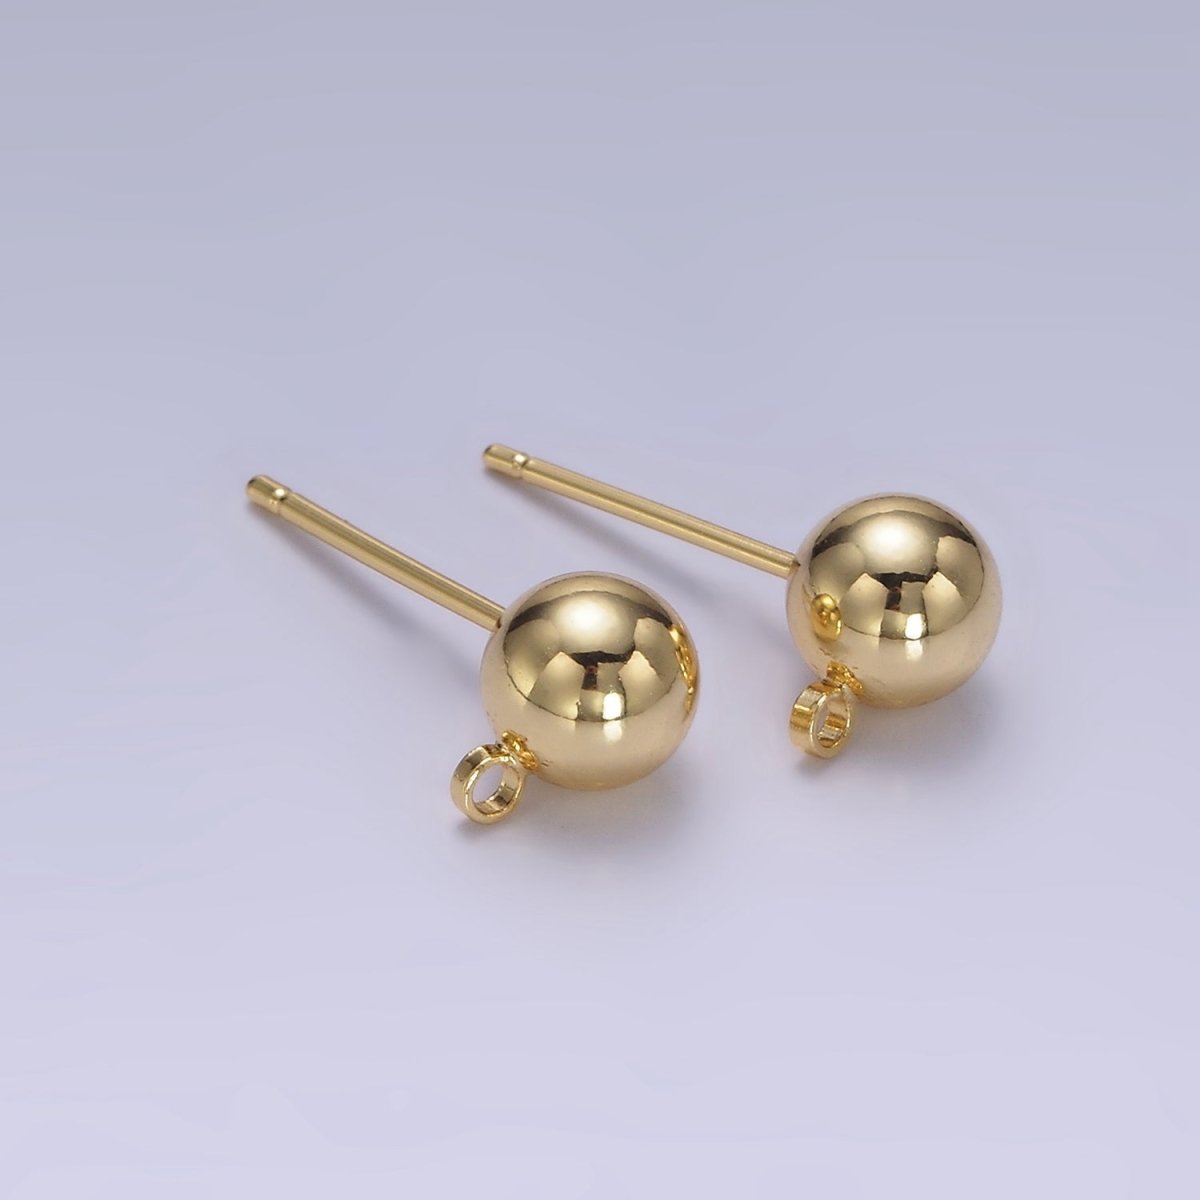 1 pair 3,5,6mm Small Ball Stud Earrings Ball 14K Gold Filled Post Earring with Closed Loop for Earring Supply Z-673 Z-678 - DLUXCA